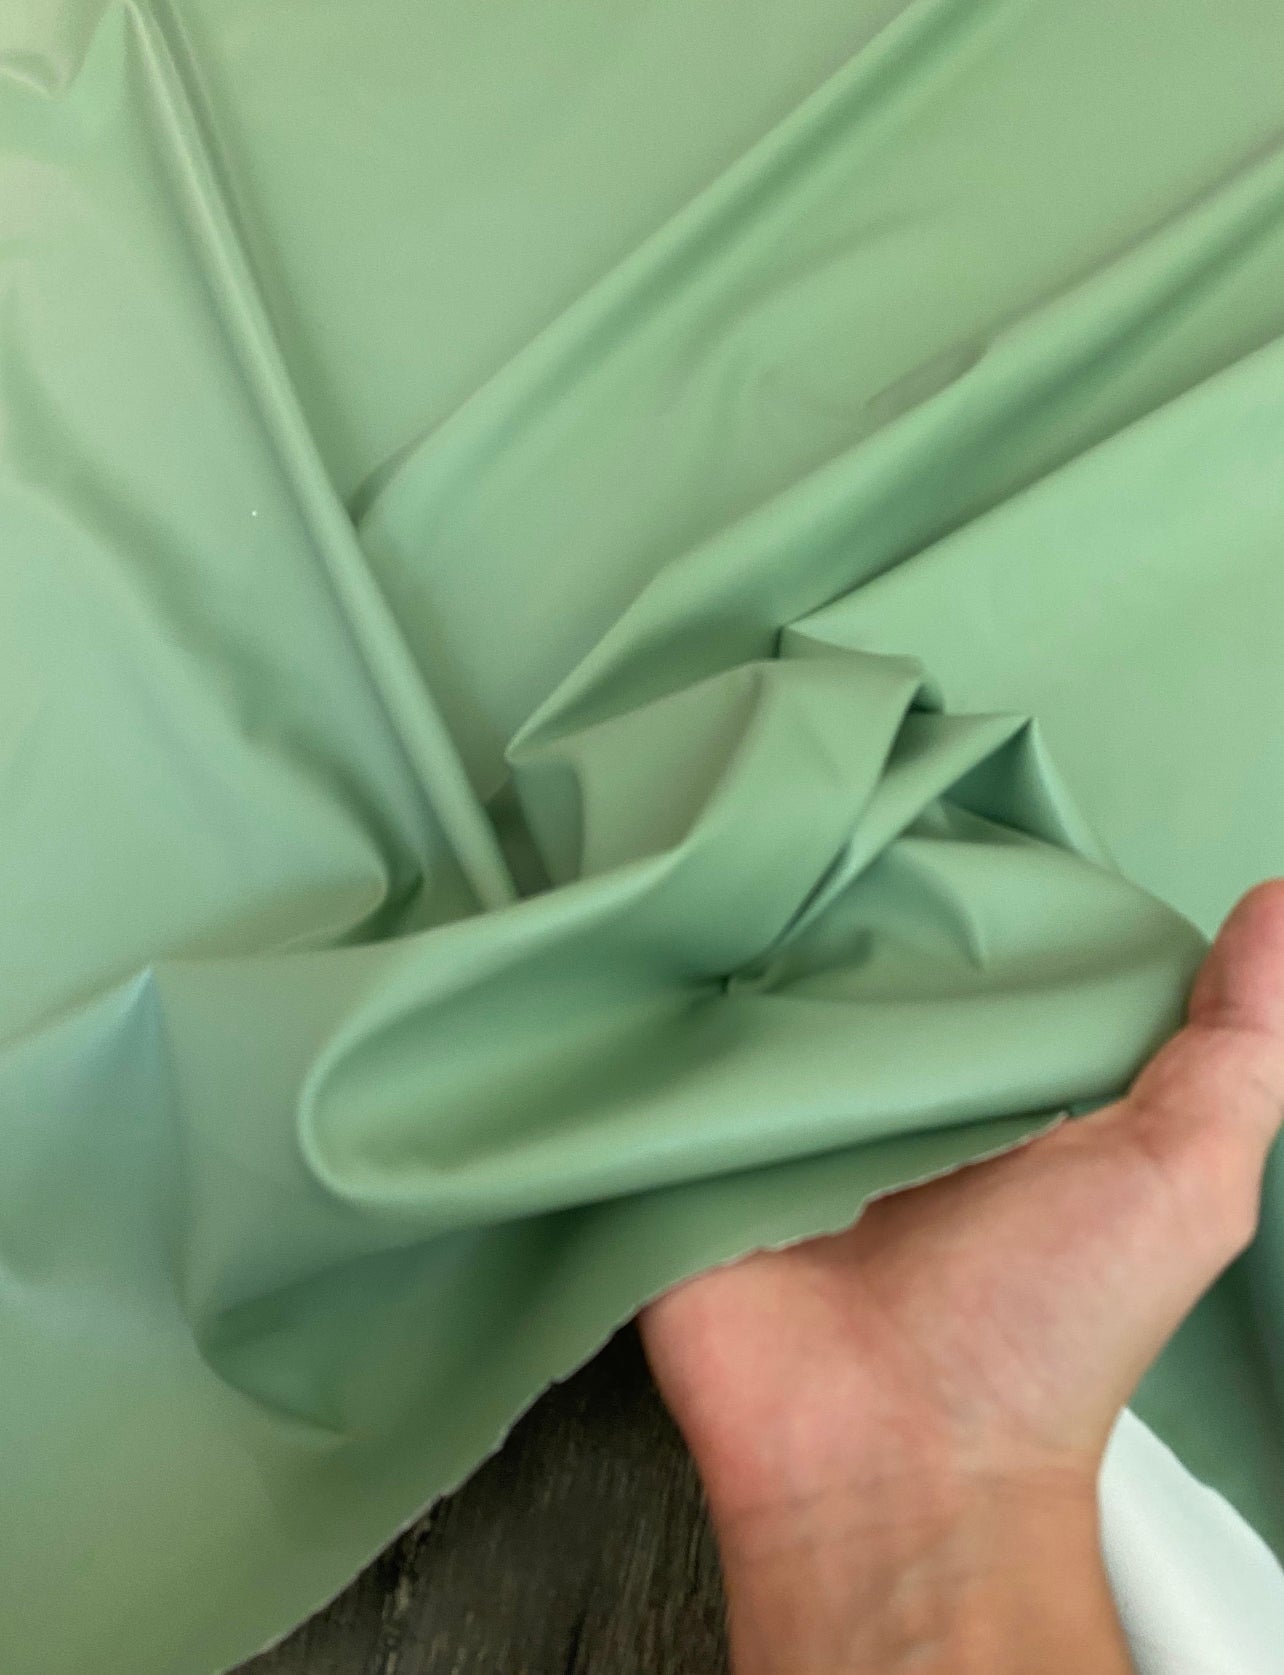 sage green stretch Faux Leather, light green Faux Leather, Faux Leather for jackets, Faux Leather for bags, Faux Leather on discount, Faux Leather on sale, premium Faux Leather, dark green Faux Leather, green Faux Leather, Faux Leather for tops, Faux Leather for leggings